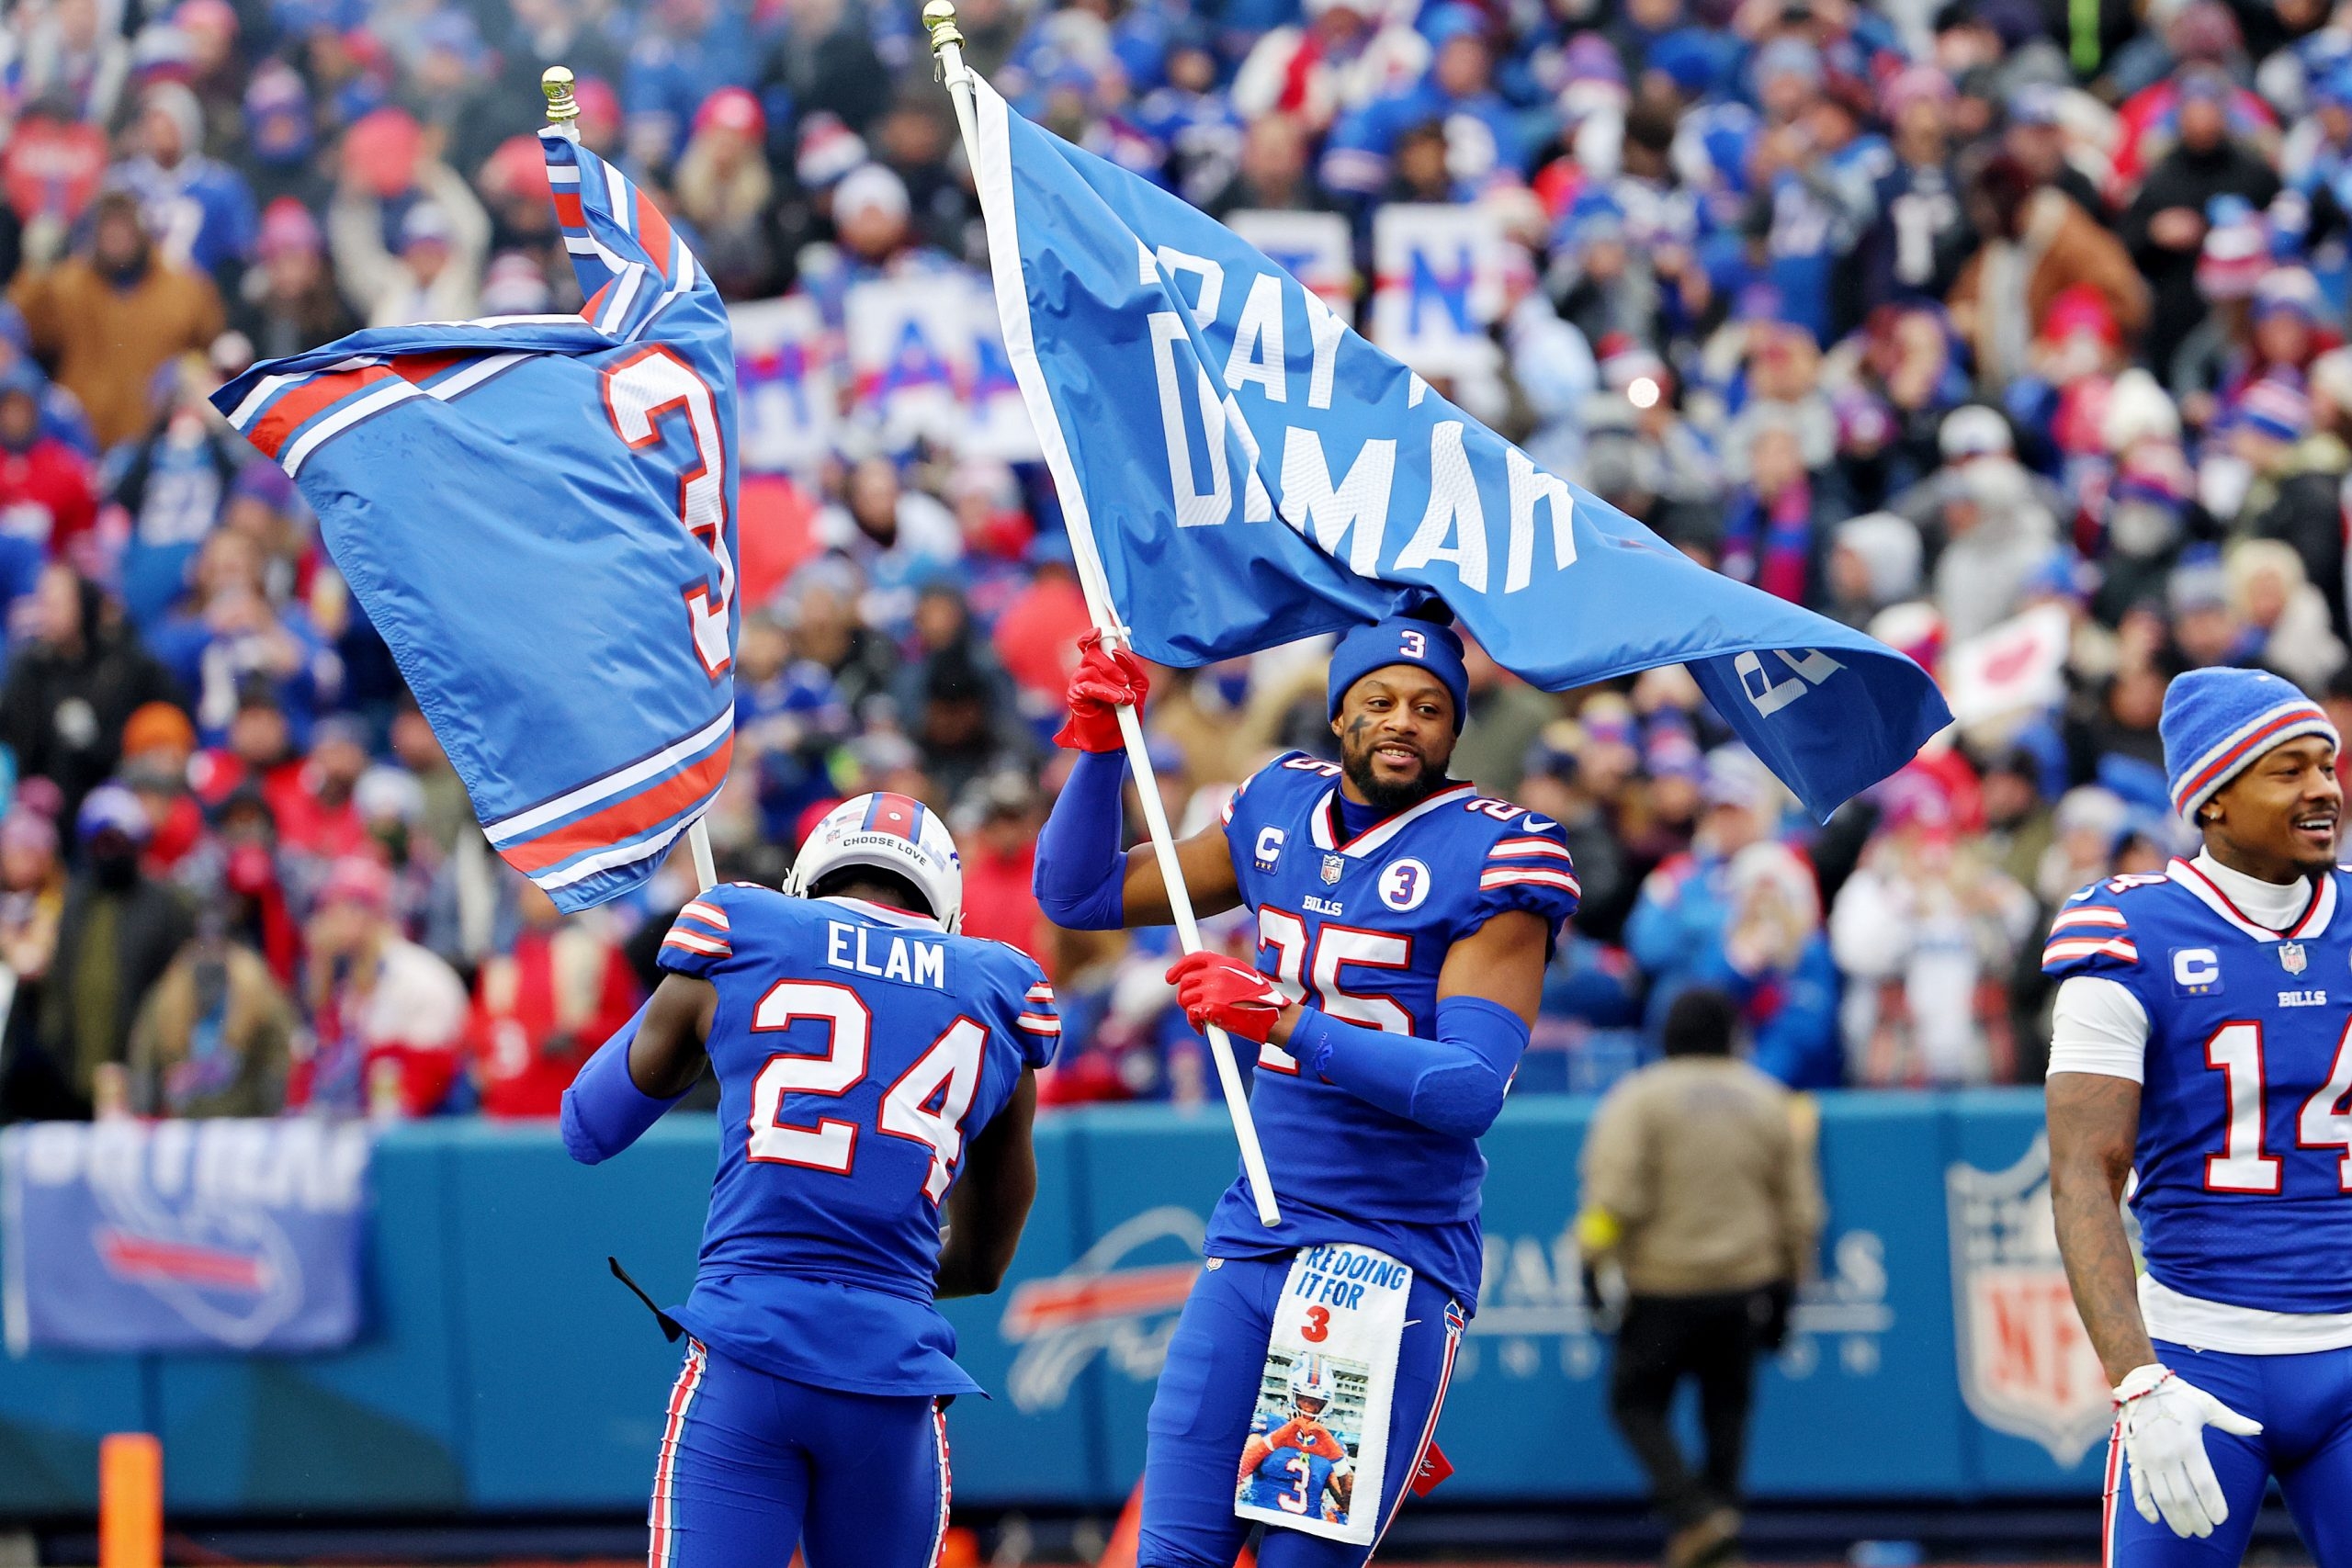 What needs to happen for the Bills to secure the AFC's No. 1 seed?